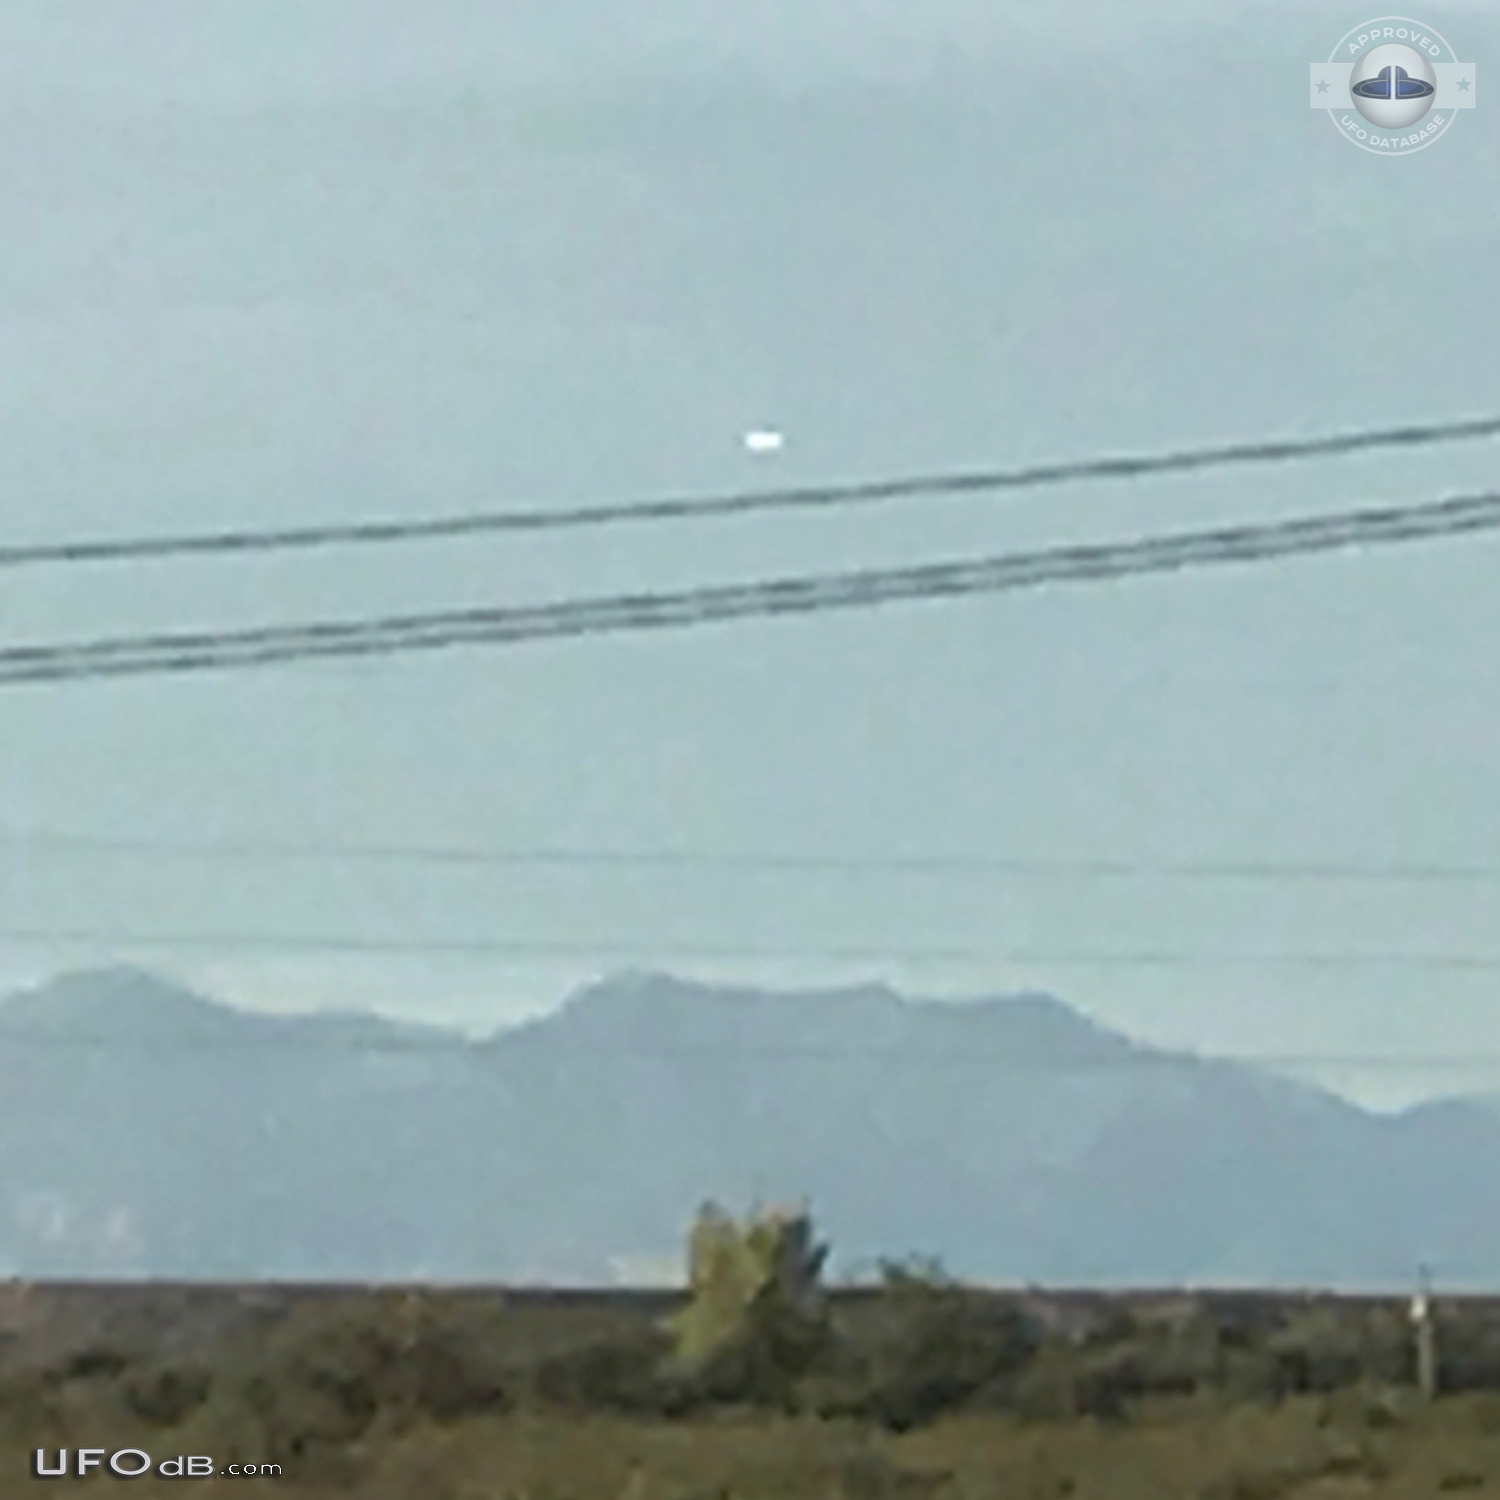 Shiny UFO stopped in the sky and quickly moved near Benson Arizona USA UFO Picture #846-3